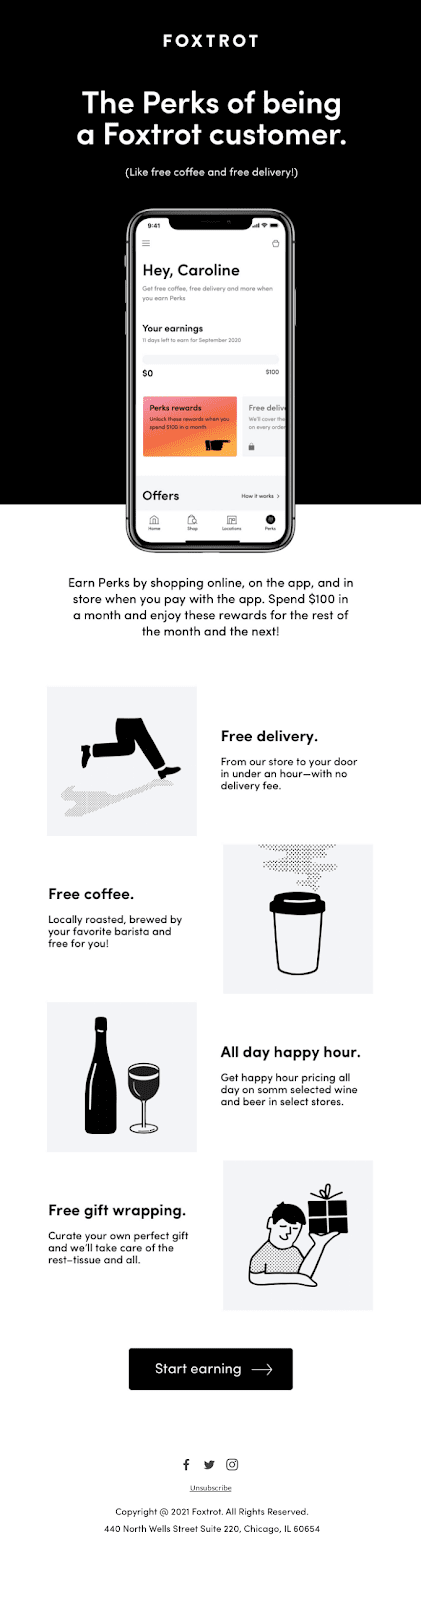 Free coffee and delivery with Foxtrot Perks